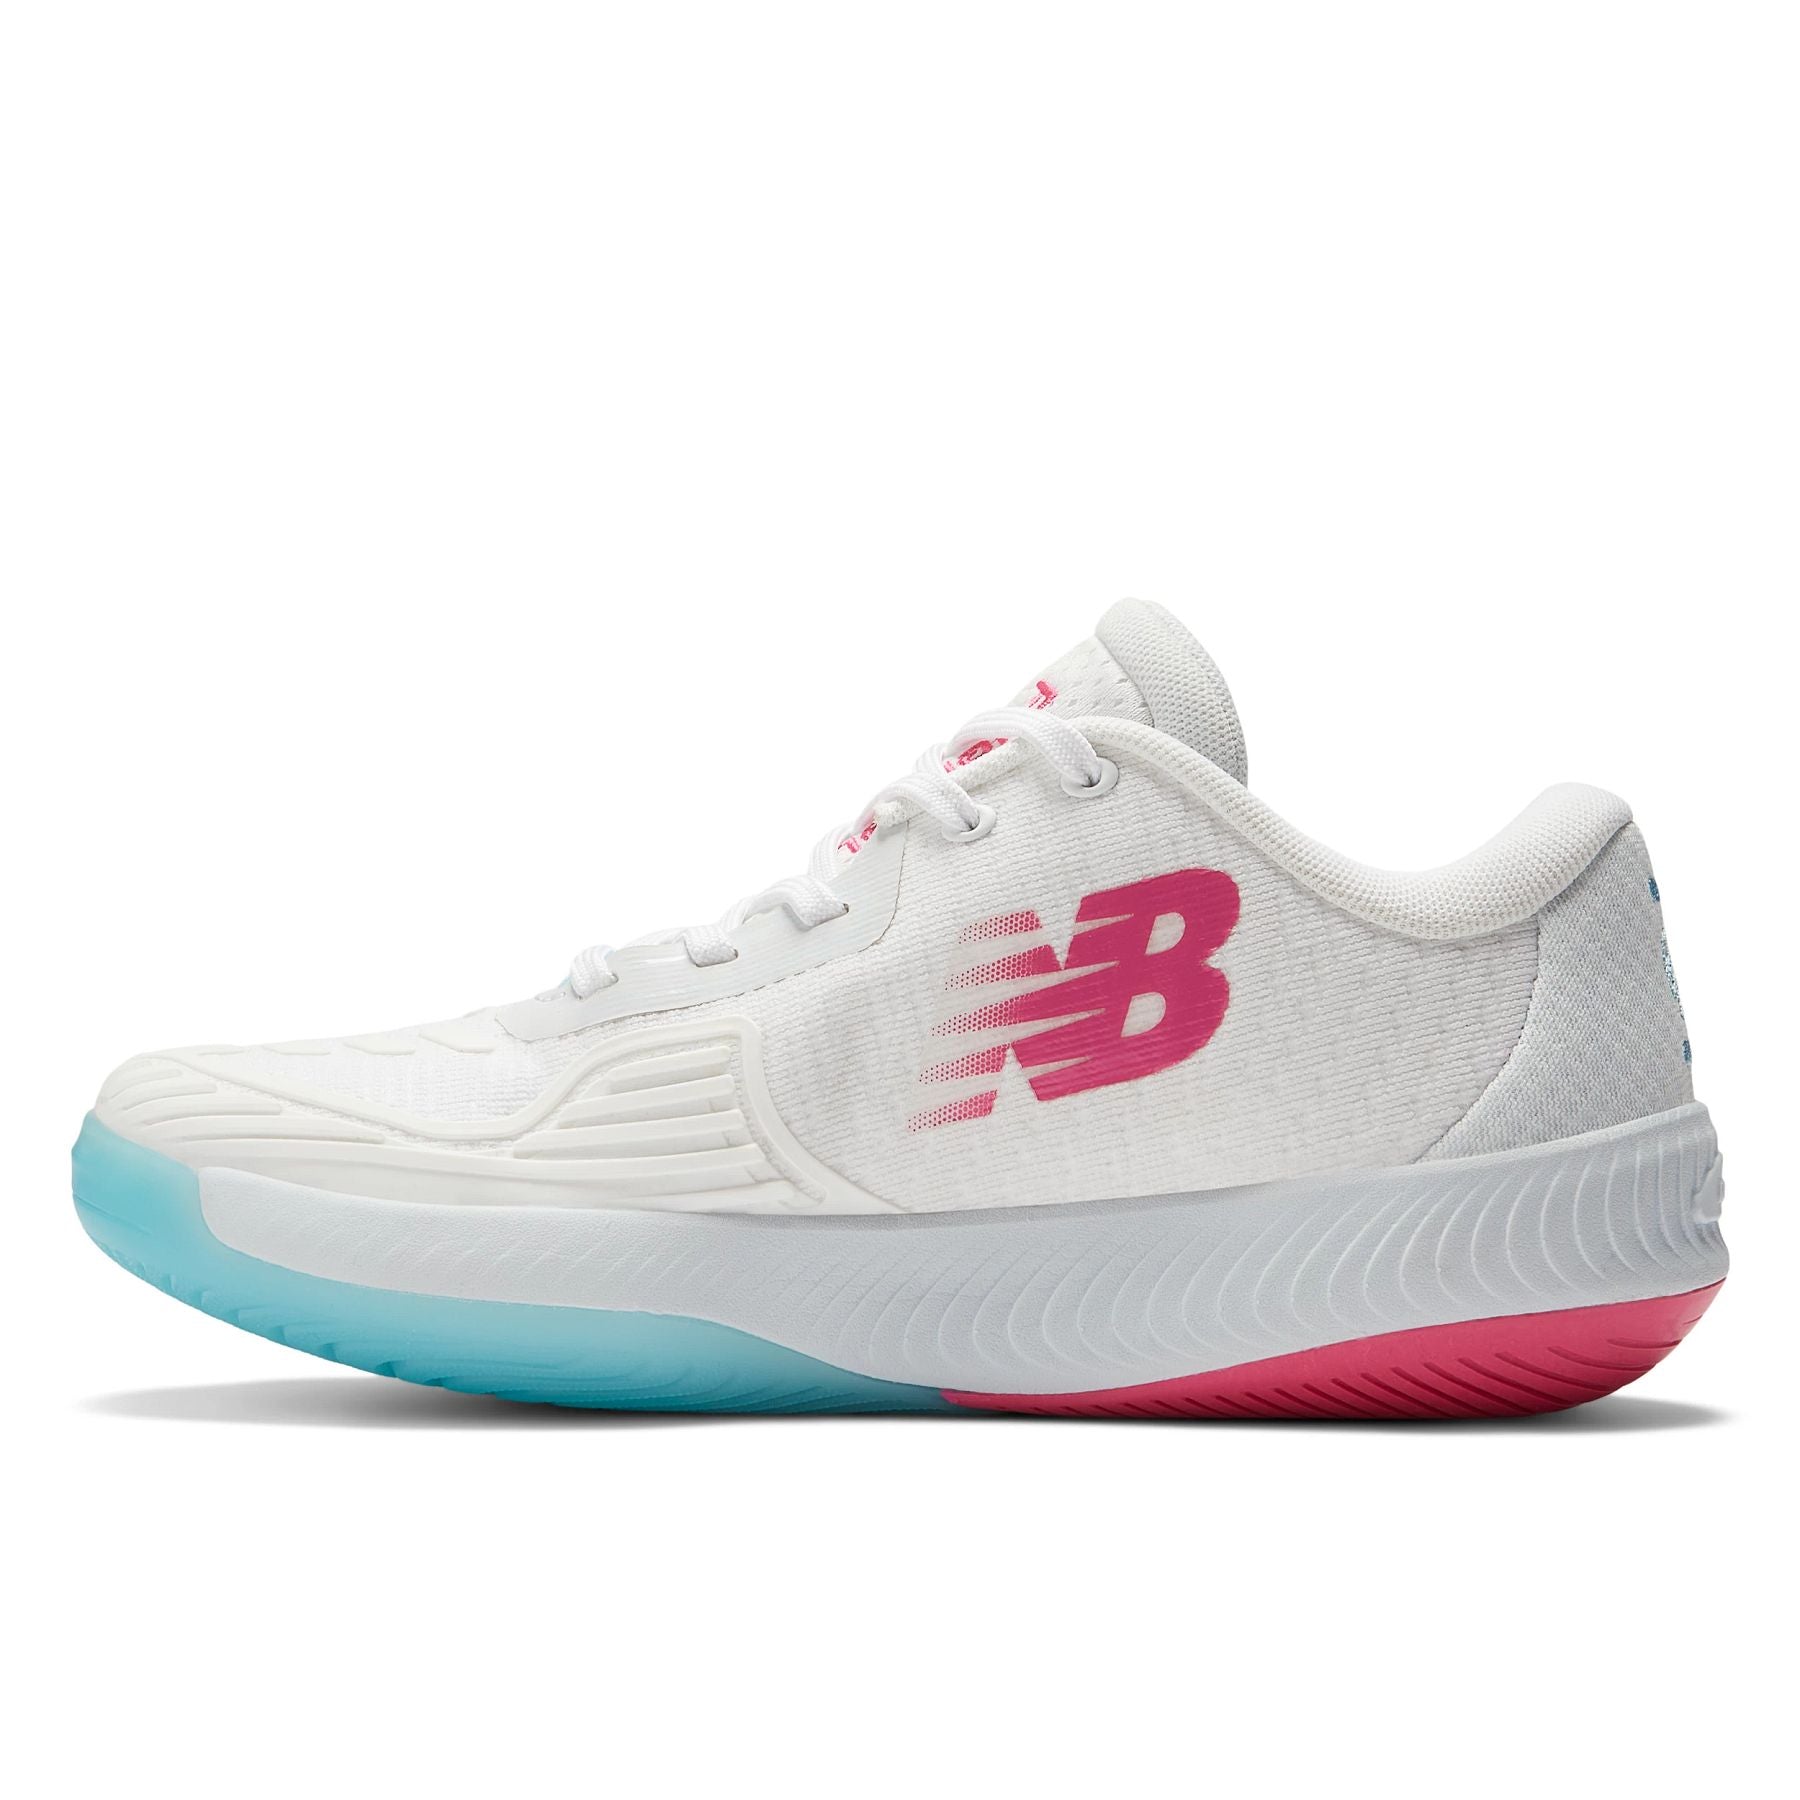 Medial view of the Women's Fuel Cell 996 V5 New Balance Pickleball shoe in White with grey and team red